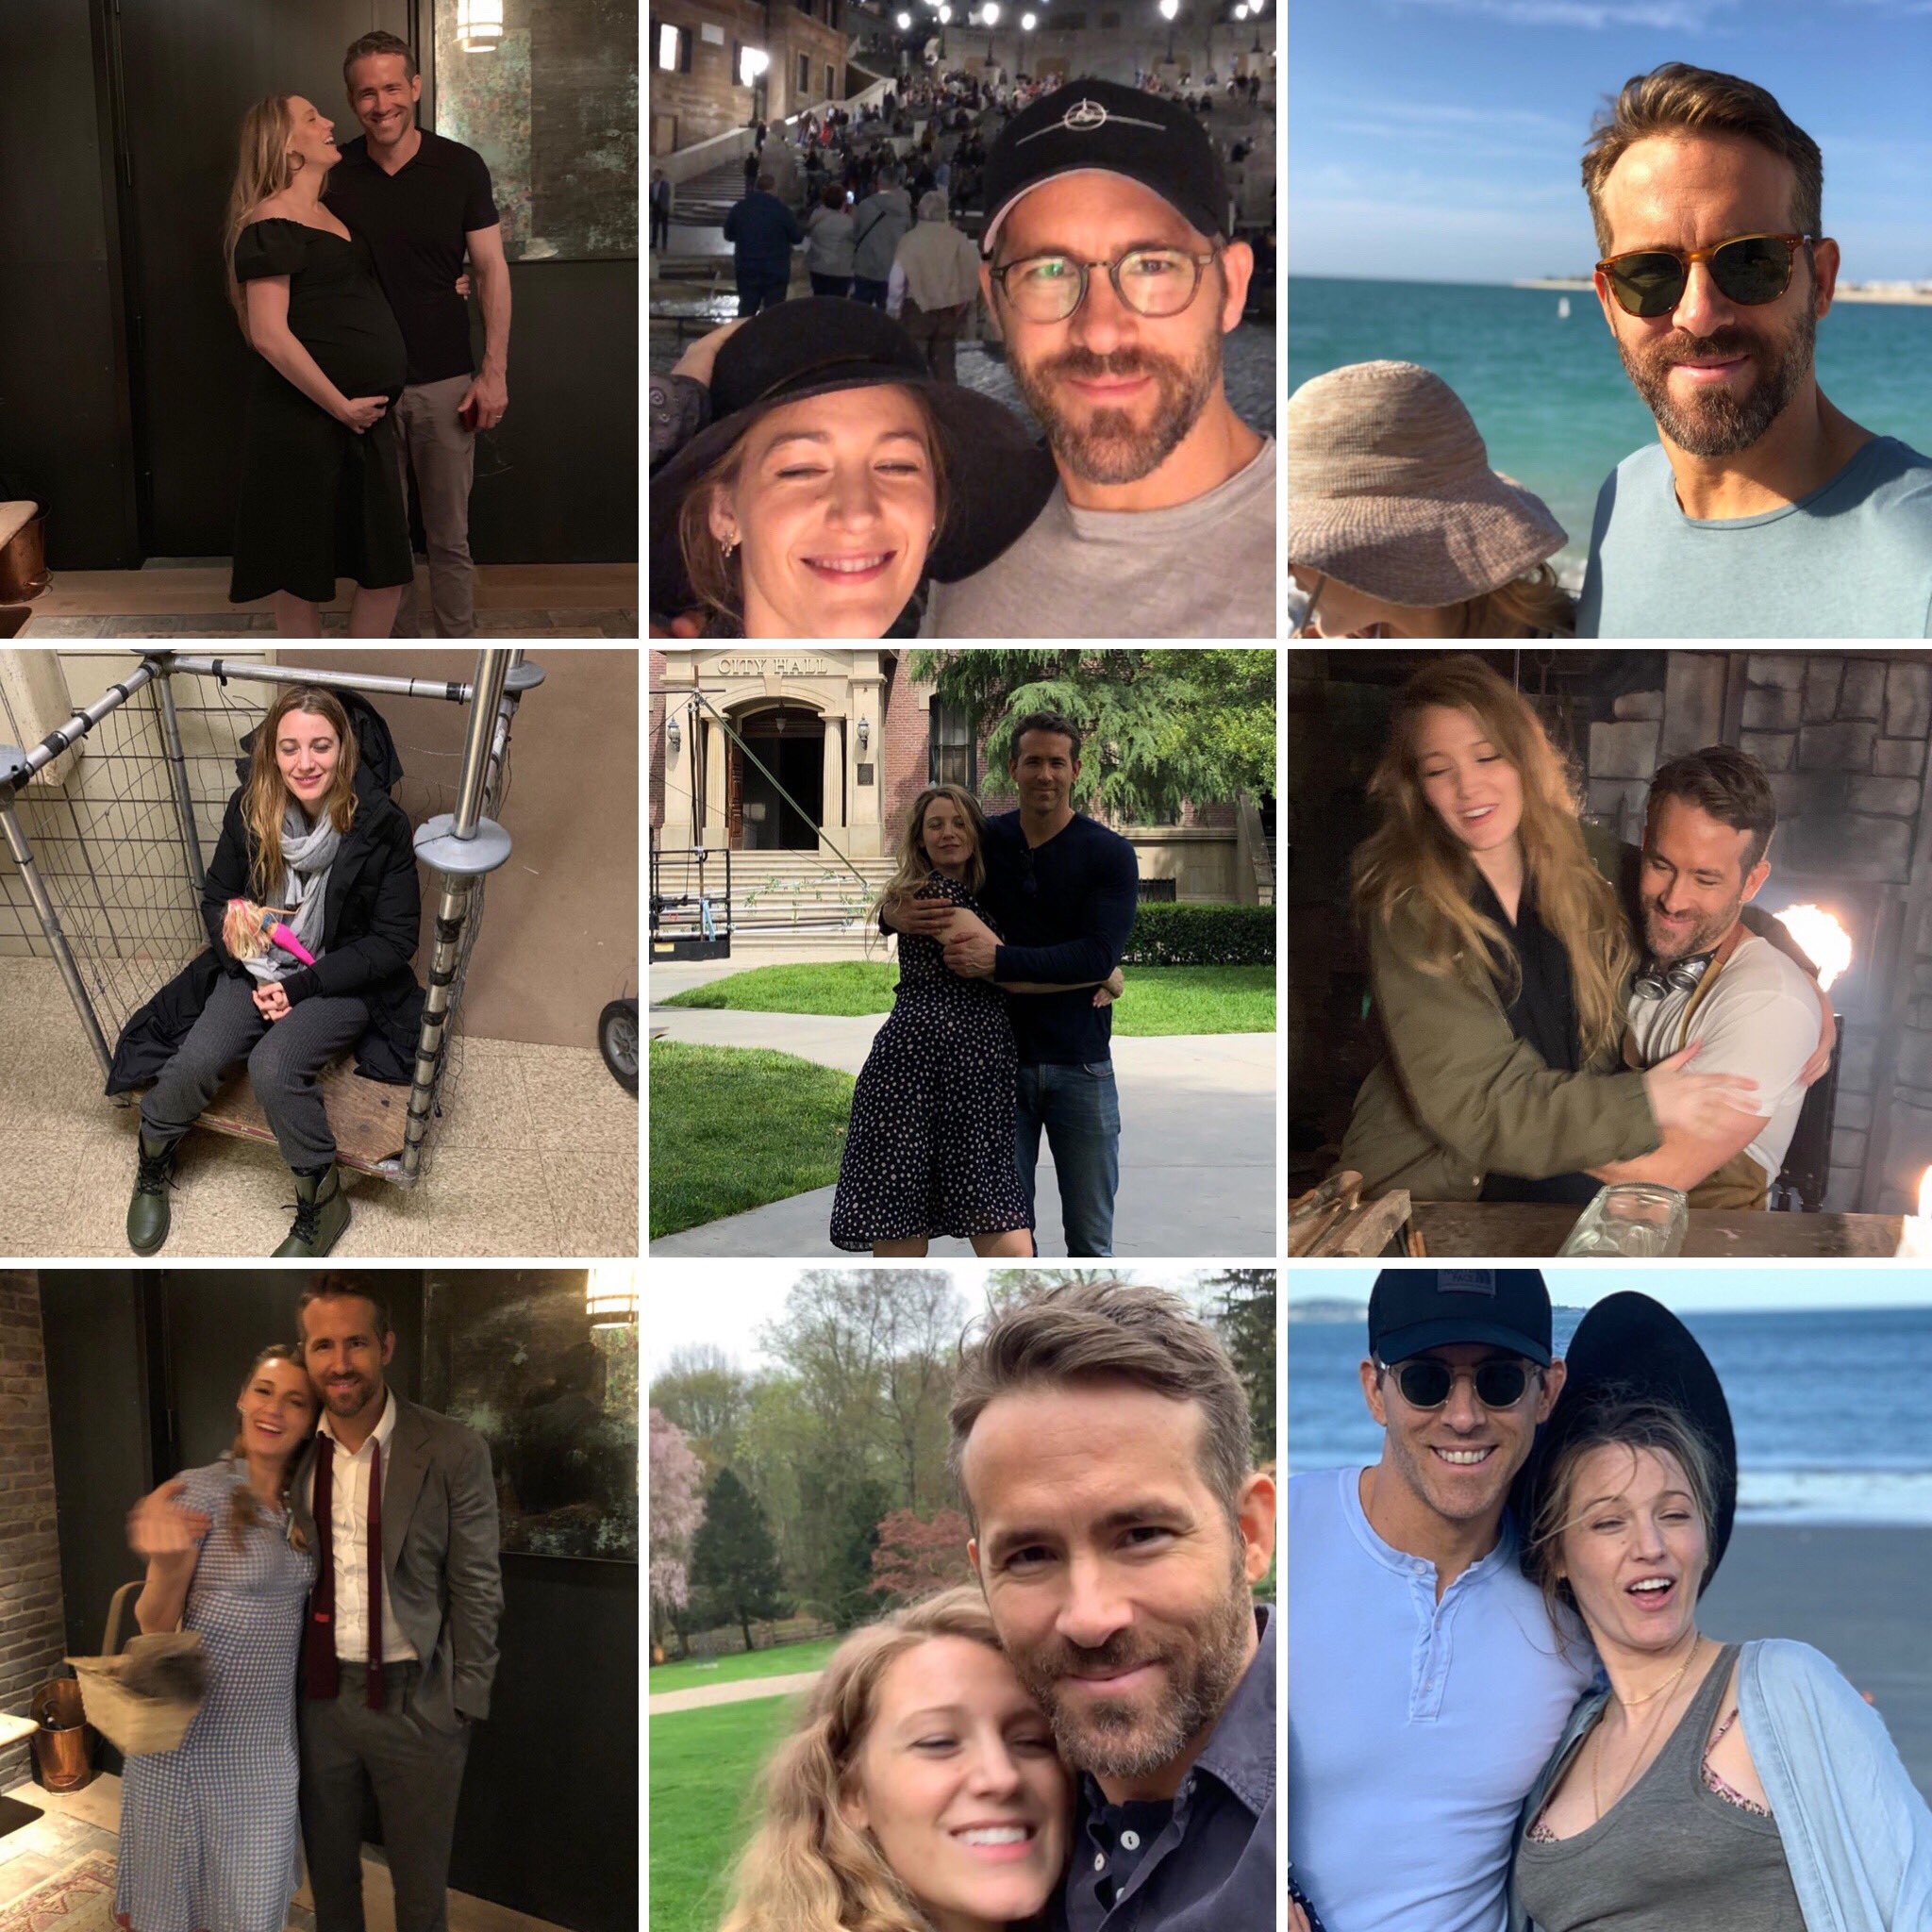 Ryan Reynolds wishing Blake Lively happy birthday with all bad photos of her gives me life 